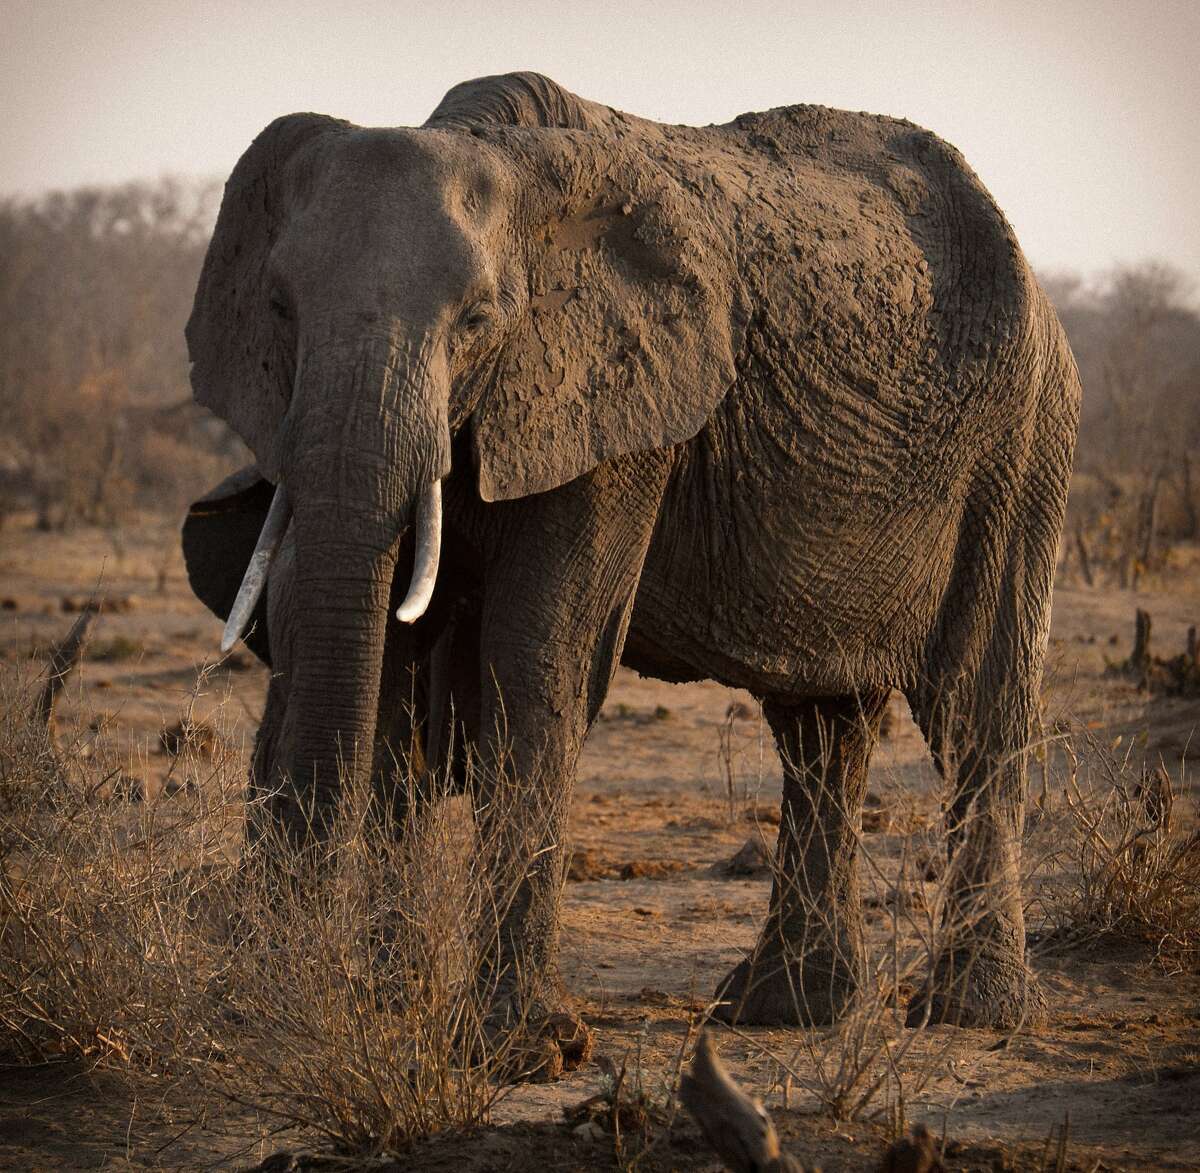 During the harsh dry season, Hwange's huge elephant population suffers from hunger and dehydration.